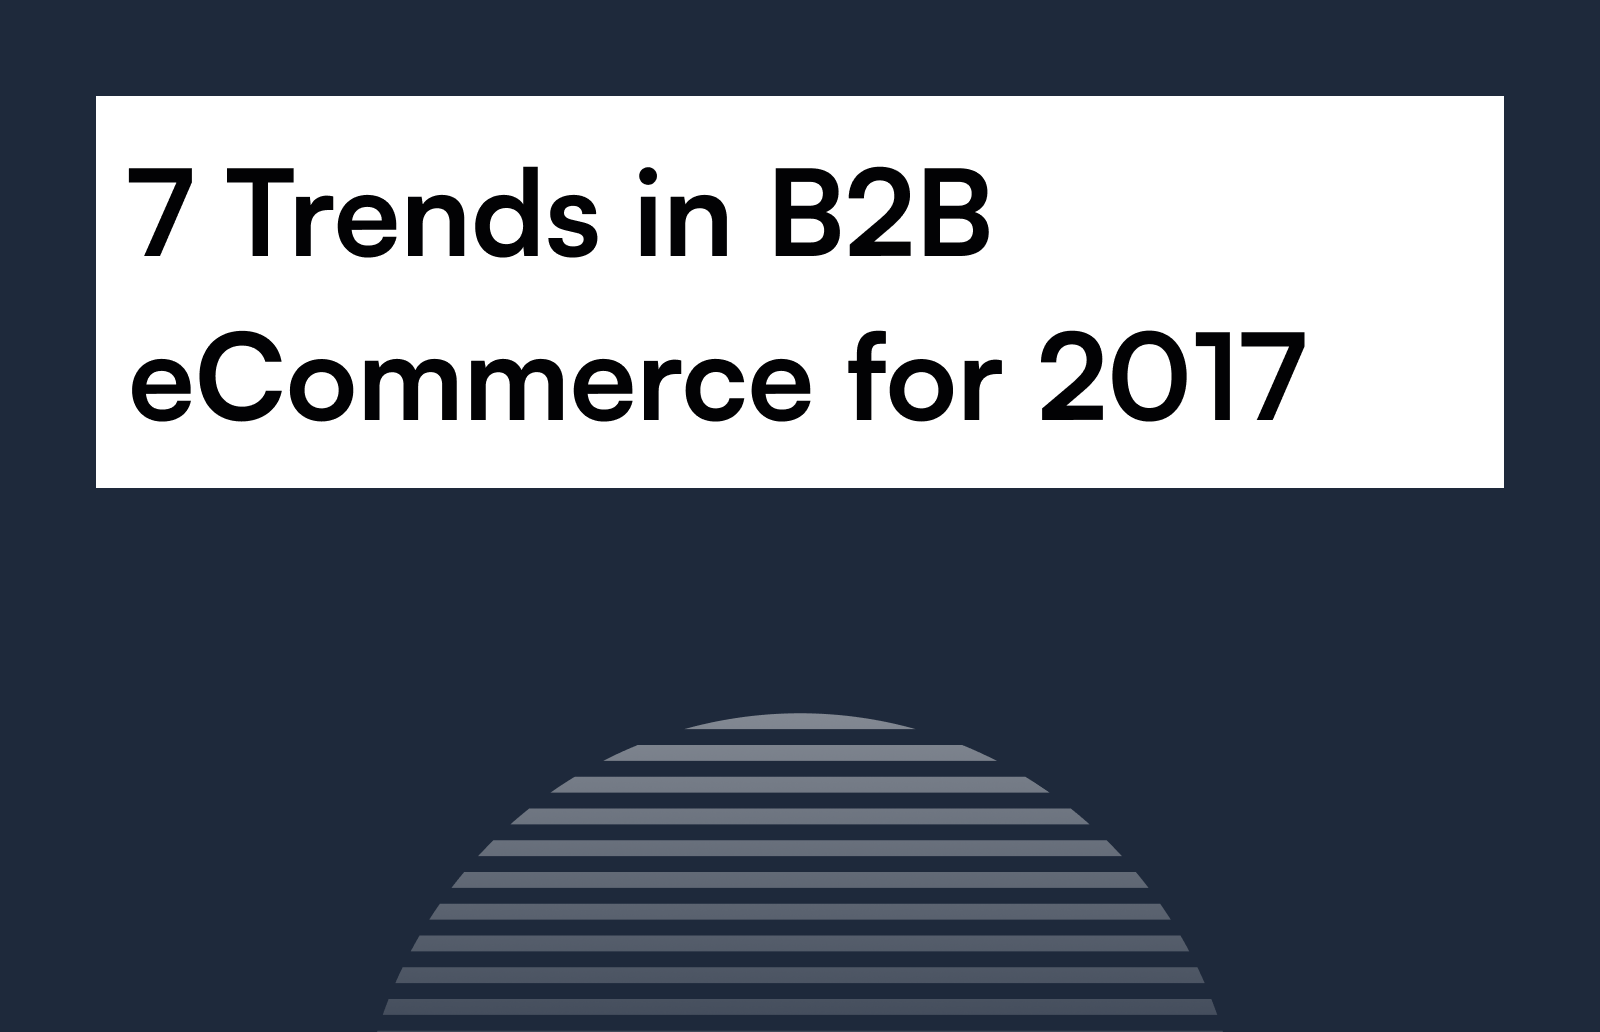 7 Trends in B2B eCommerce for 2017